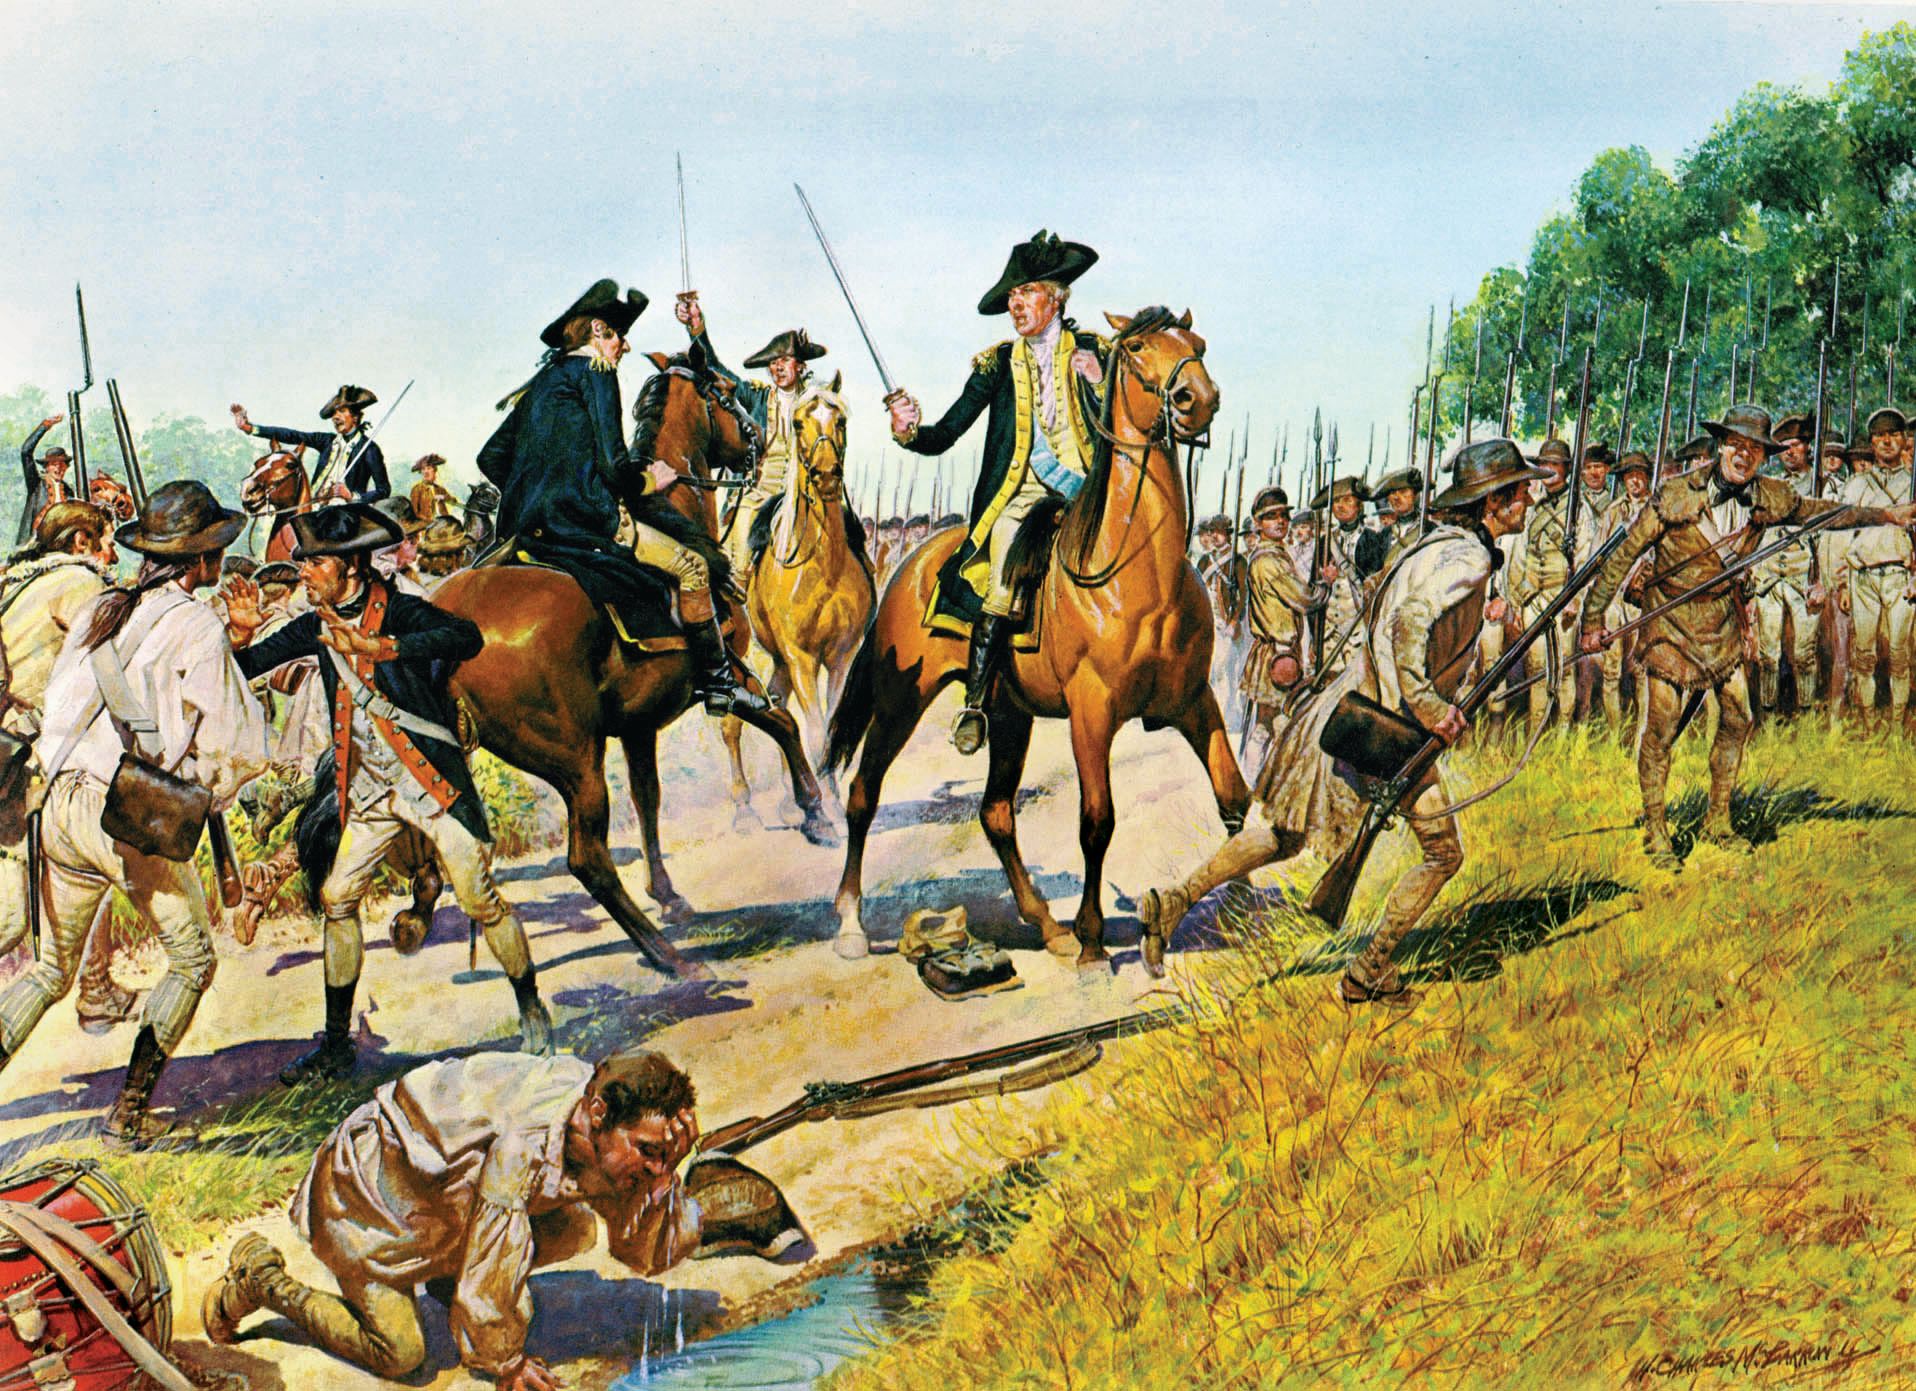 An angry George Washington confronts Charles Lee as staff officers attempt to halt the A­merican retreat. The men’s ragtag uniforms in this H. Charles McBarron painting are more accurate than those shown in Lutze’s piece.